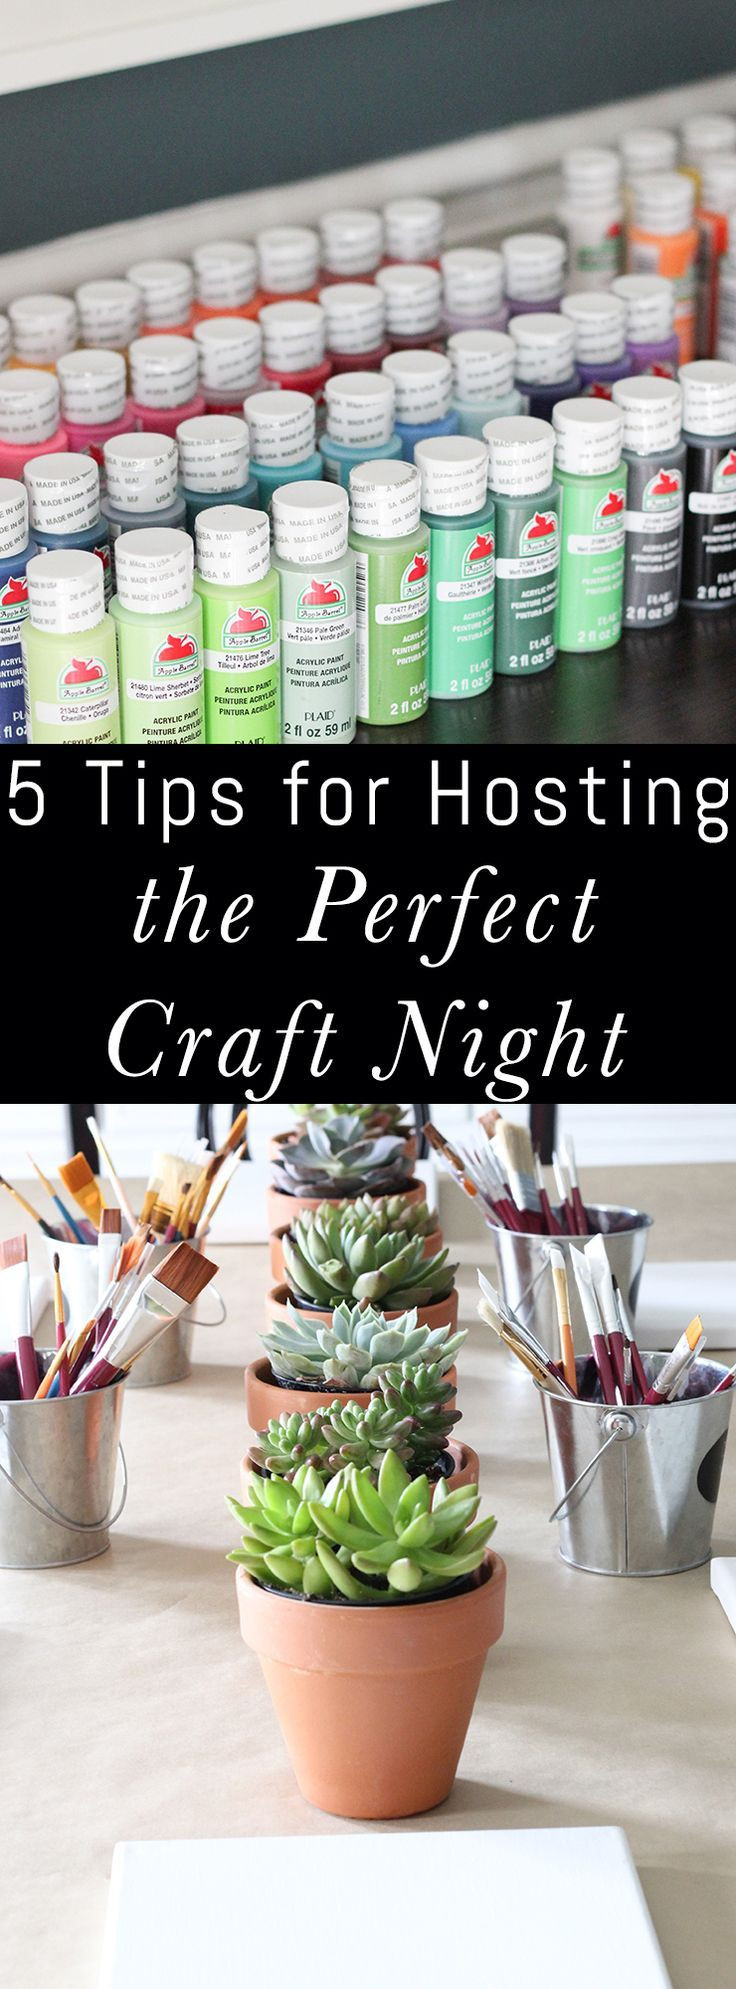 Craft Night Ideas For Adults
 5 Tips for Hosting the Perfect Craft Night